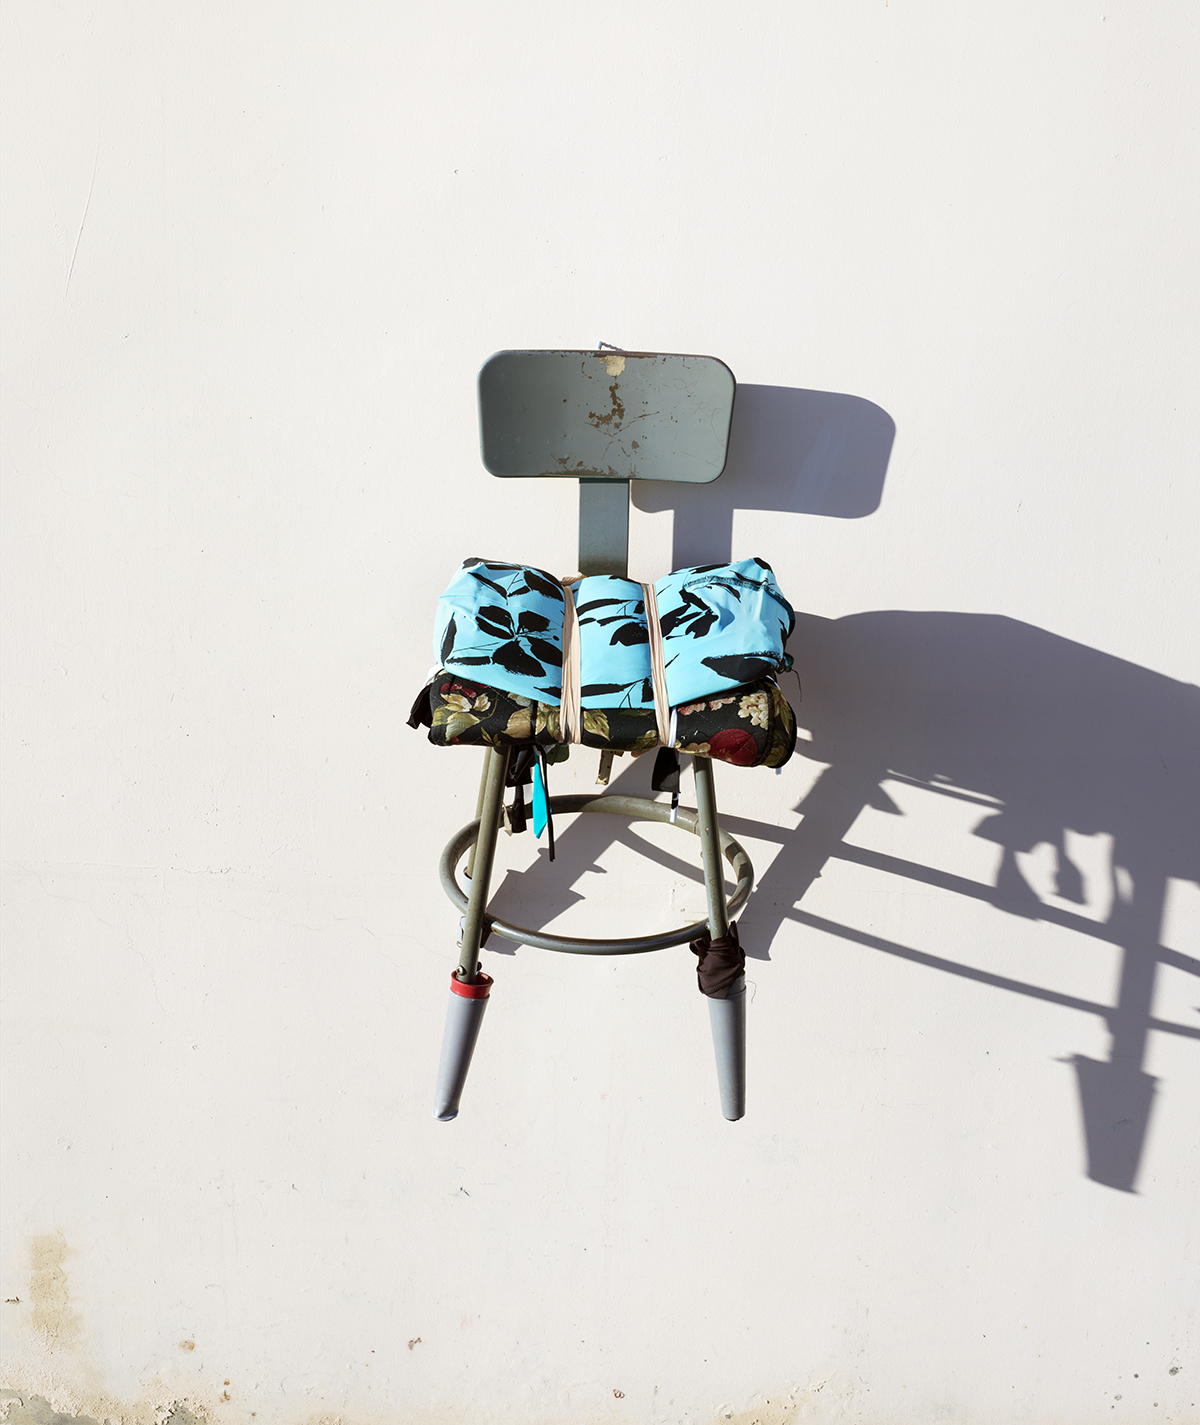   Factory Chair #1 , 2015 Archival pigment print 38 x 32 inches   ———— 